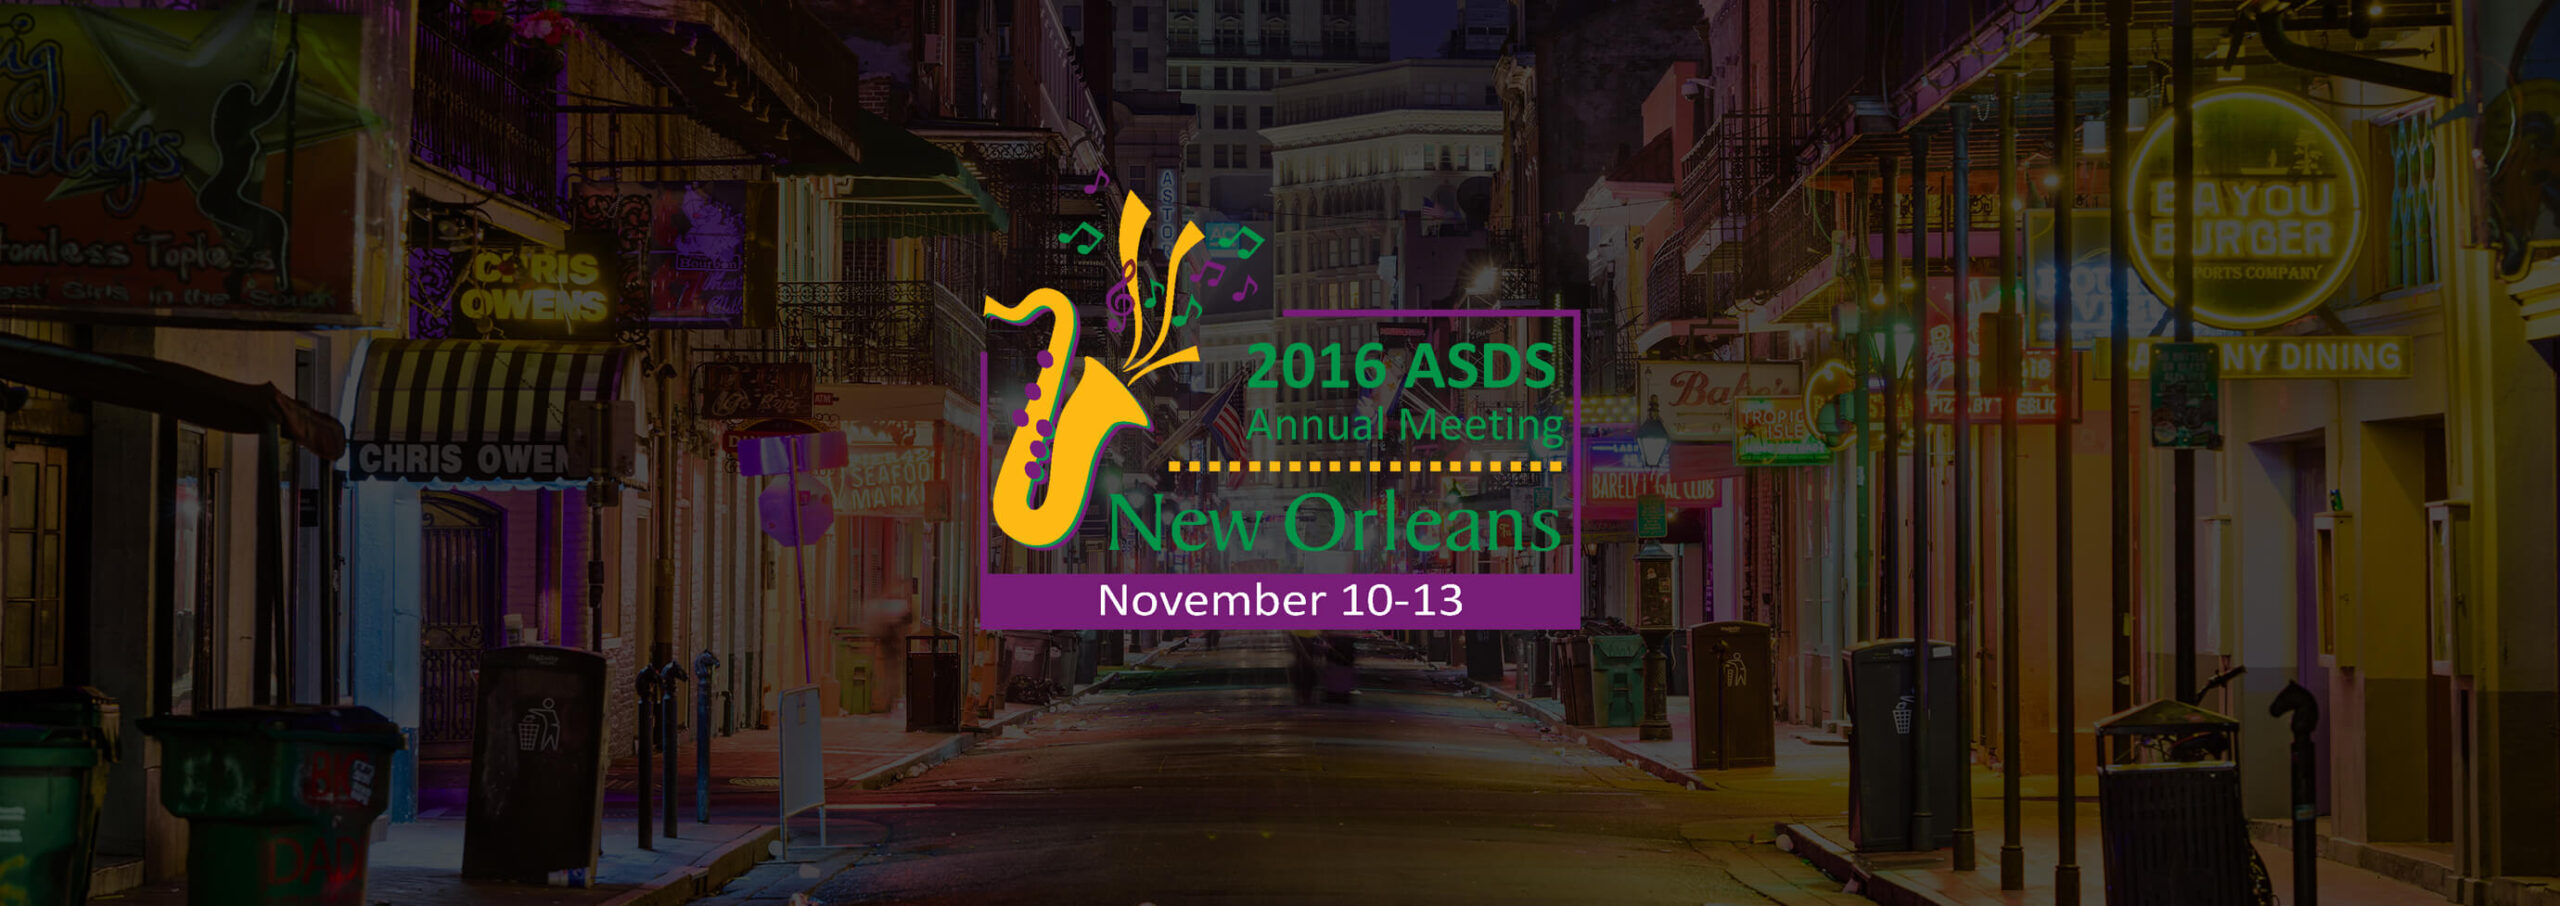 ASDS Meeting 2016 New Orleans event banner